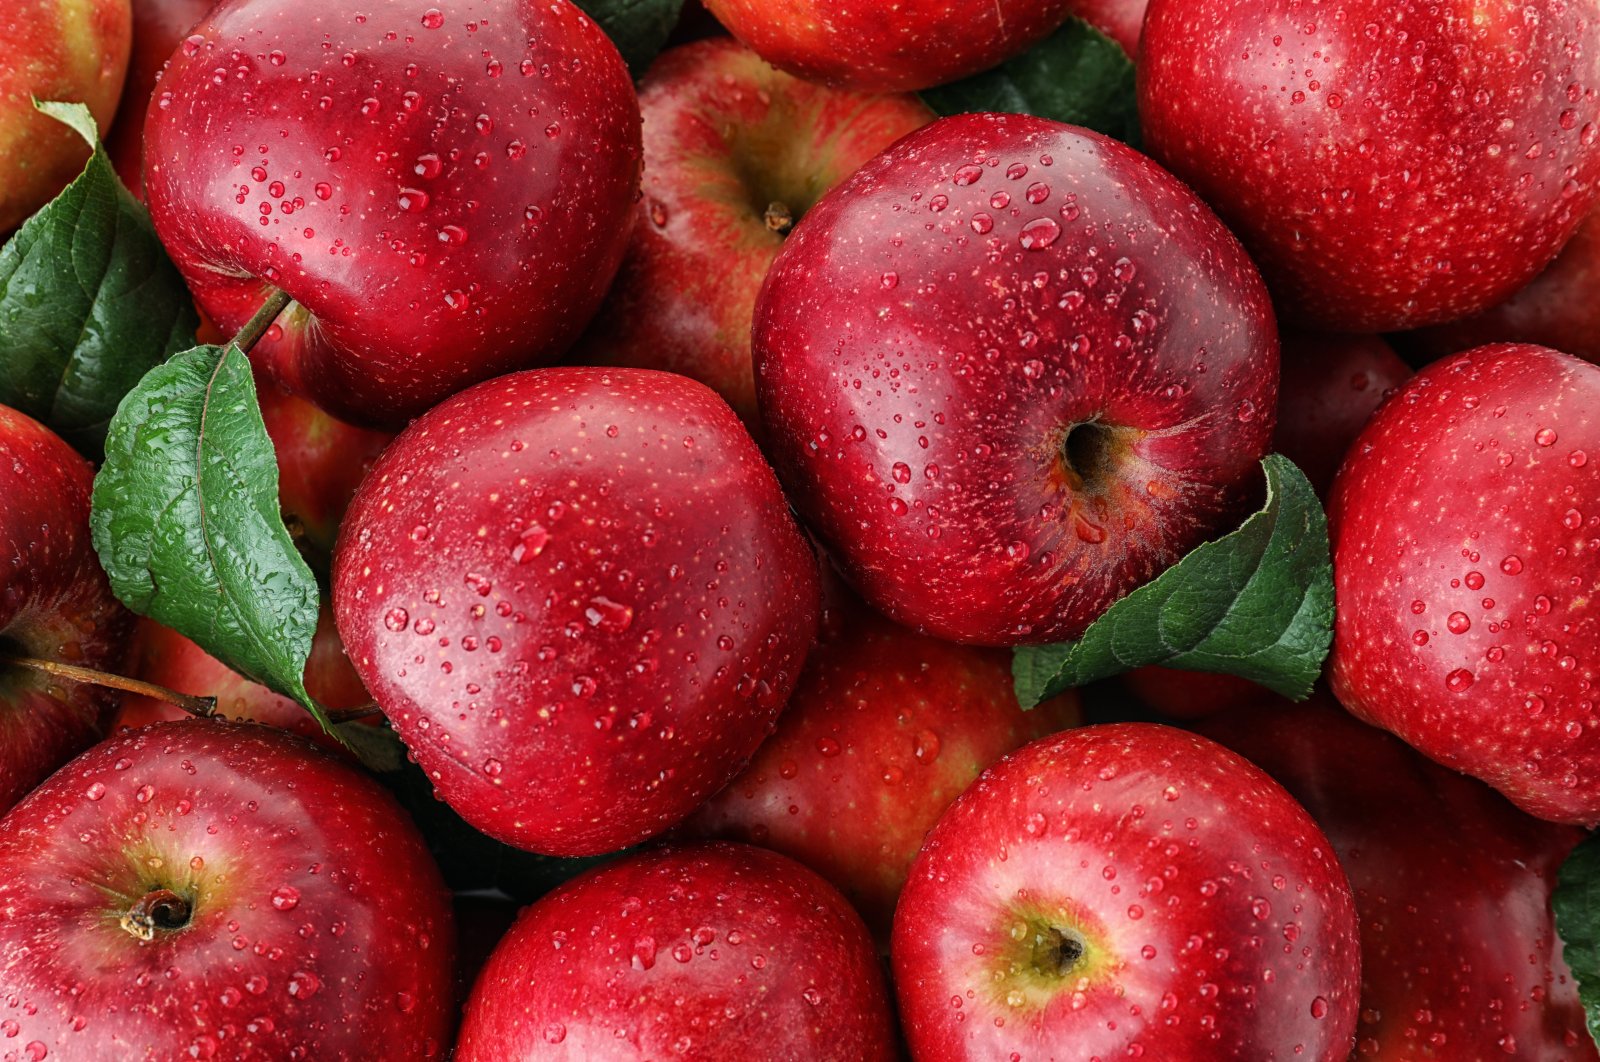 Turkey exported $90 million worth of apples in 2019. (File Photo)